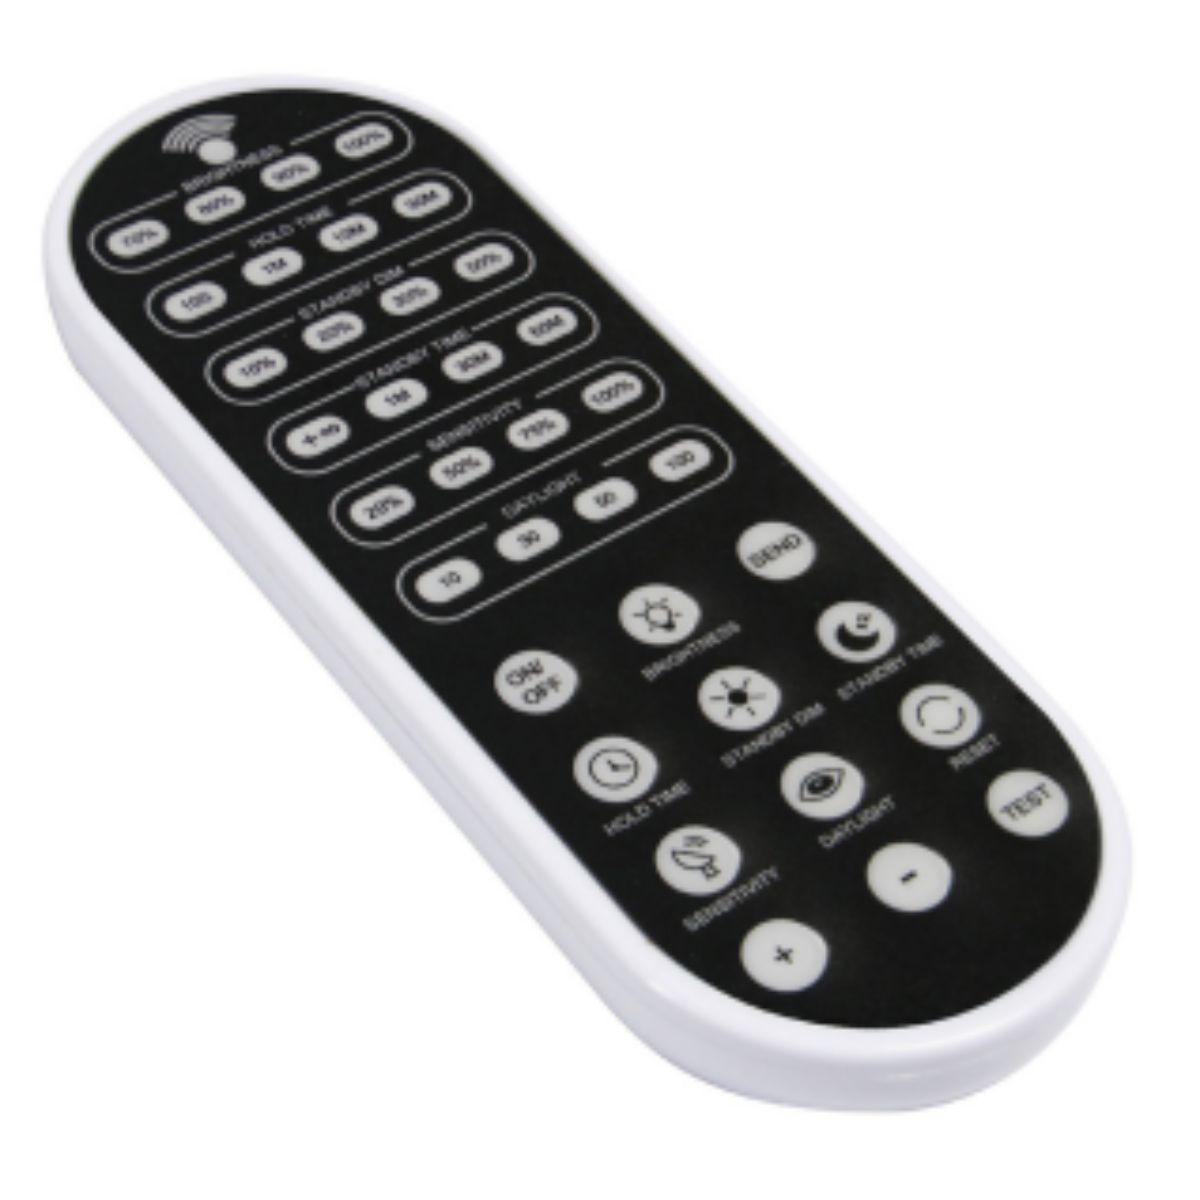 Keystone Remote Control For Dimmable Microwave/PIR Sensor - Bees Lighting